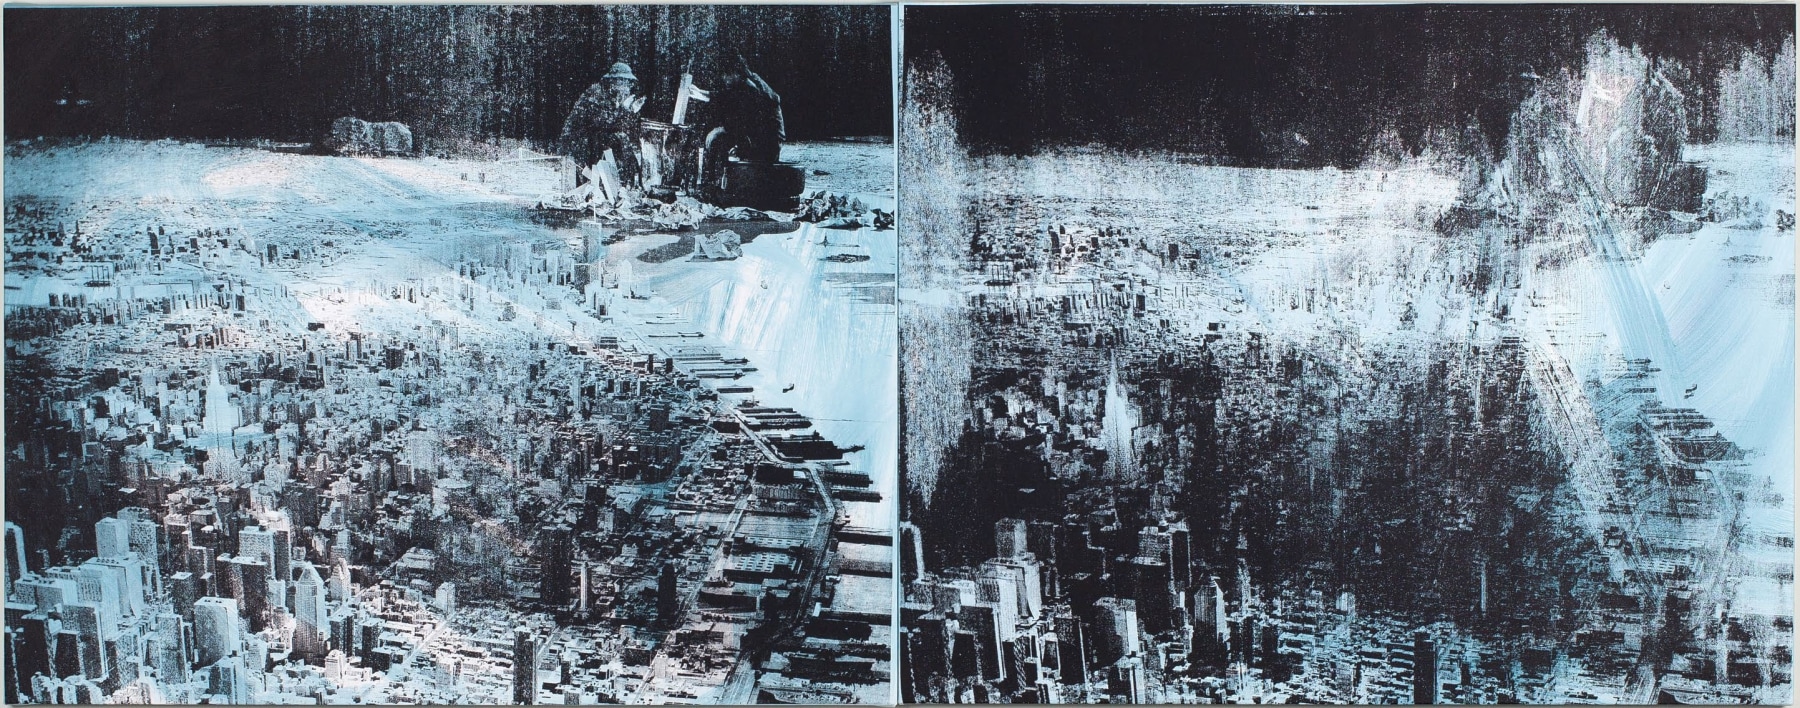 THE BRUCE HIGH QUALITY FOUNDATION,&amp;nbsp;Hoovervilles,&amp;nbsp;2011, silkscreen, acrylic paint on canvas, 35 3/4 x 90 1/2 inches (diptych)